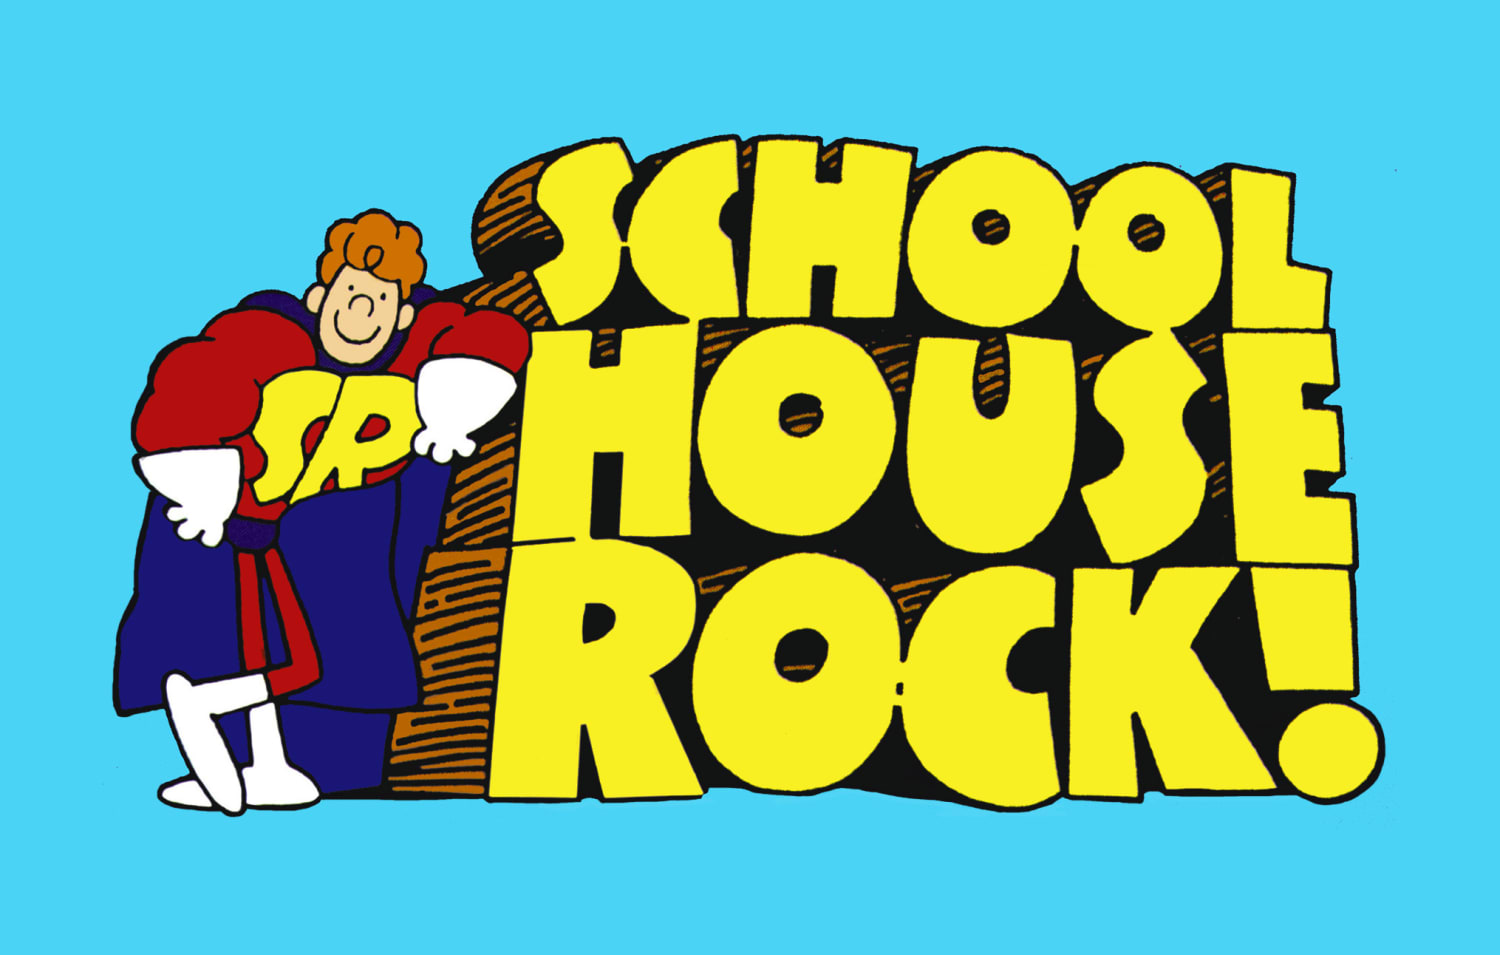 Celebrate The 50th Anniversary of 'Schoolhouse Rock'